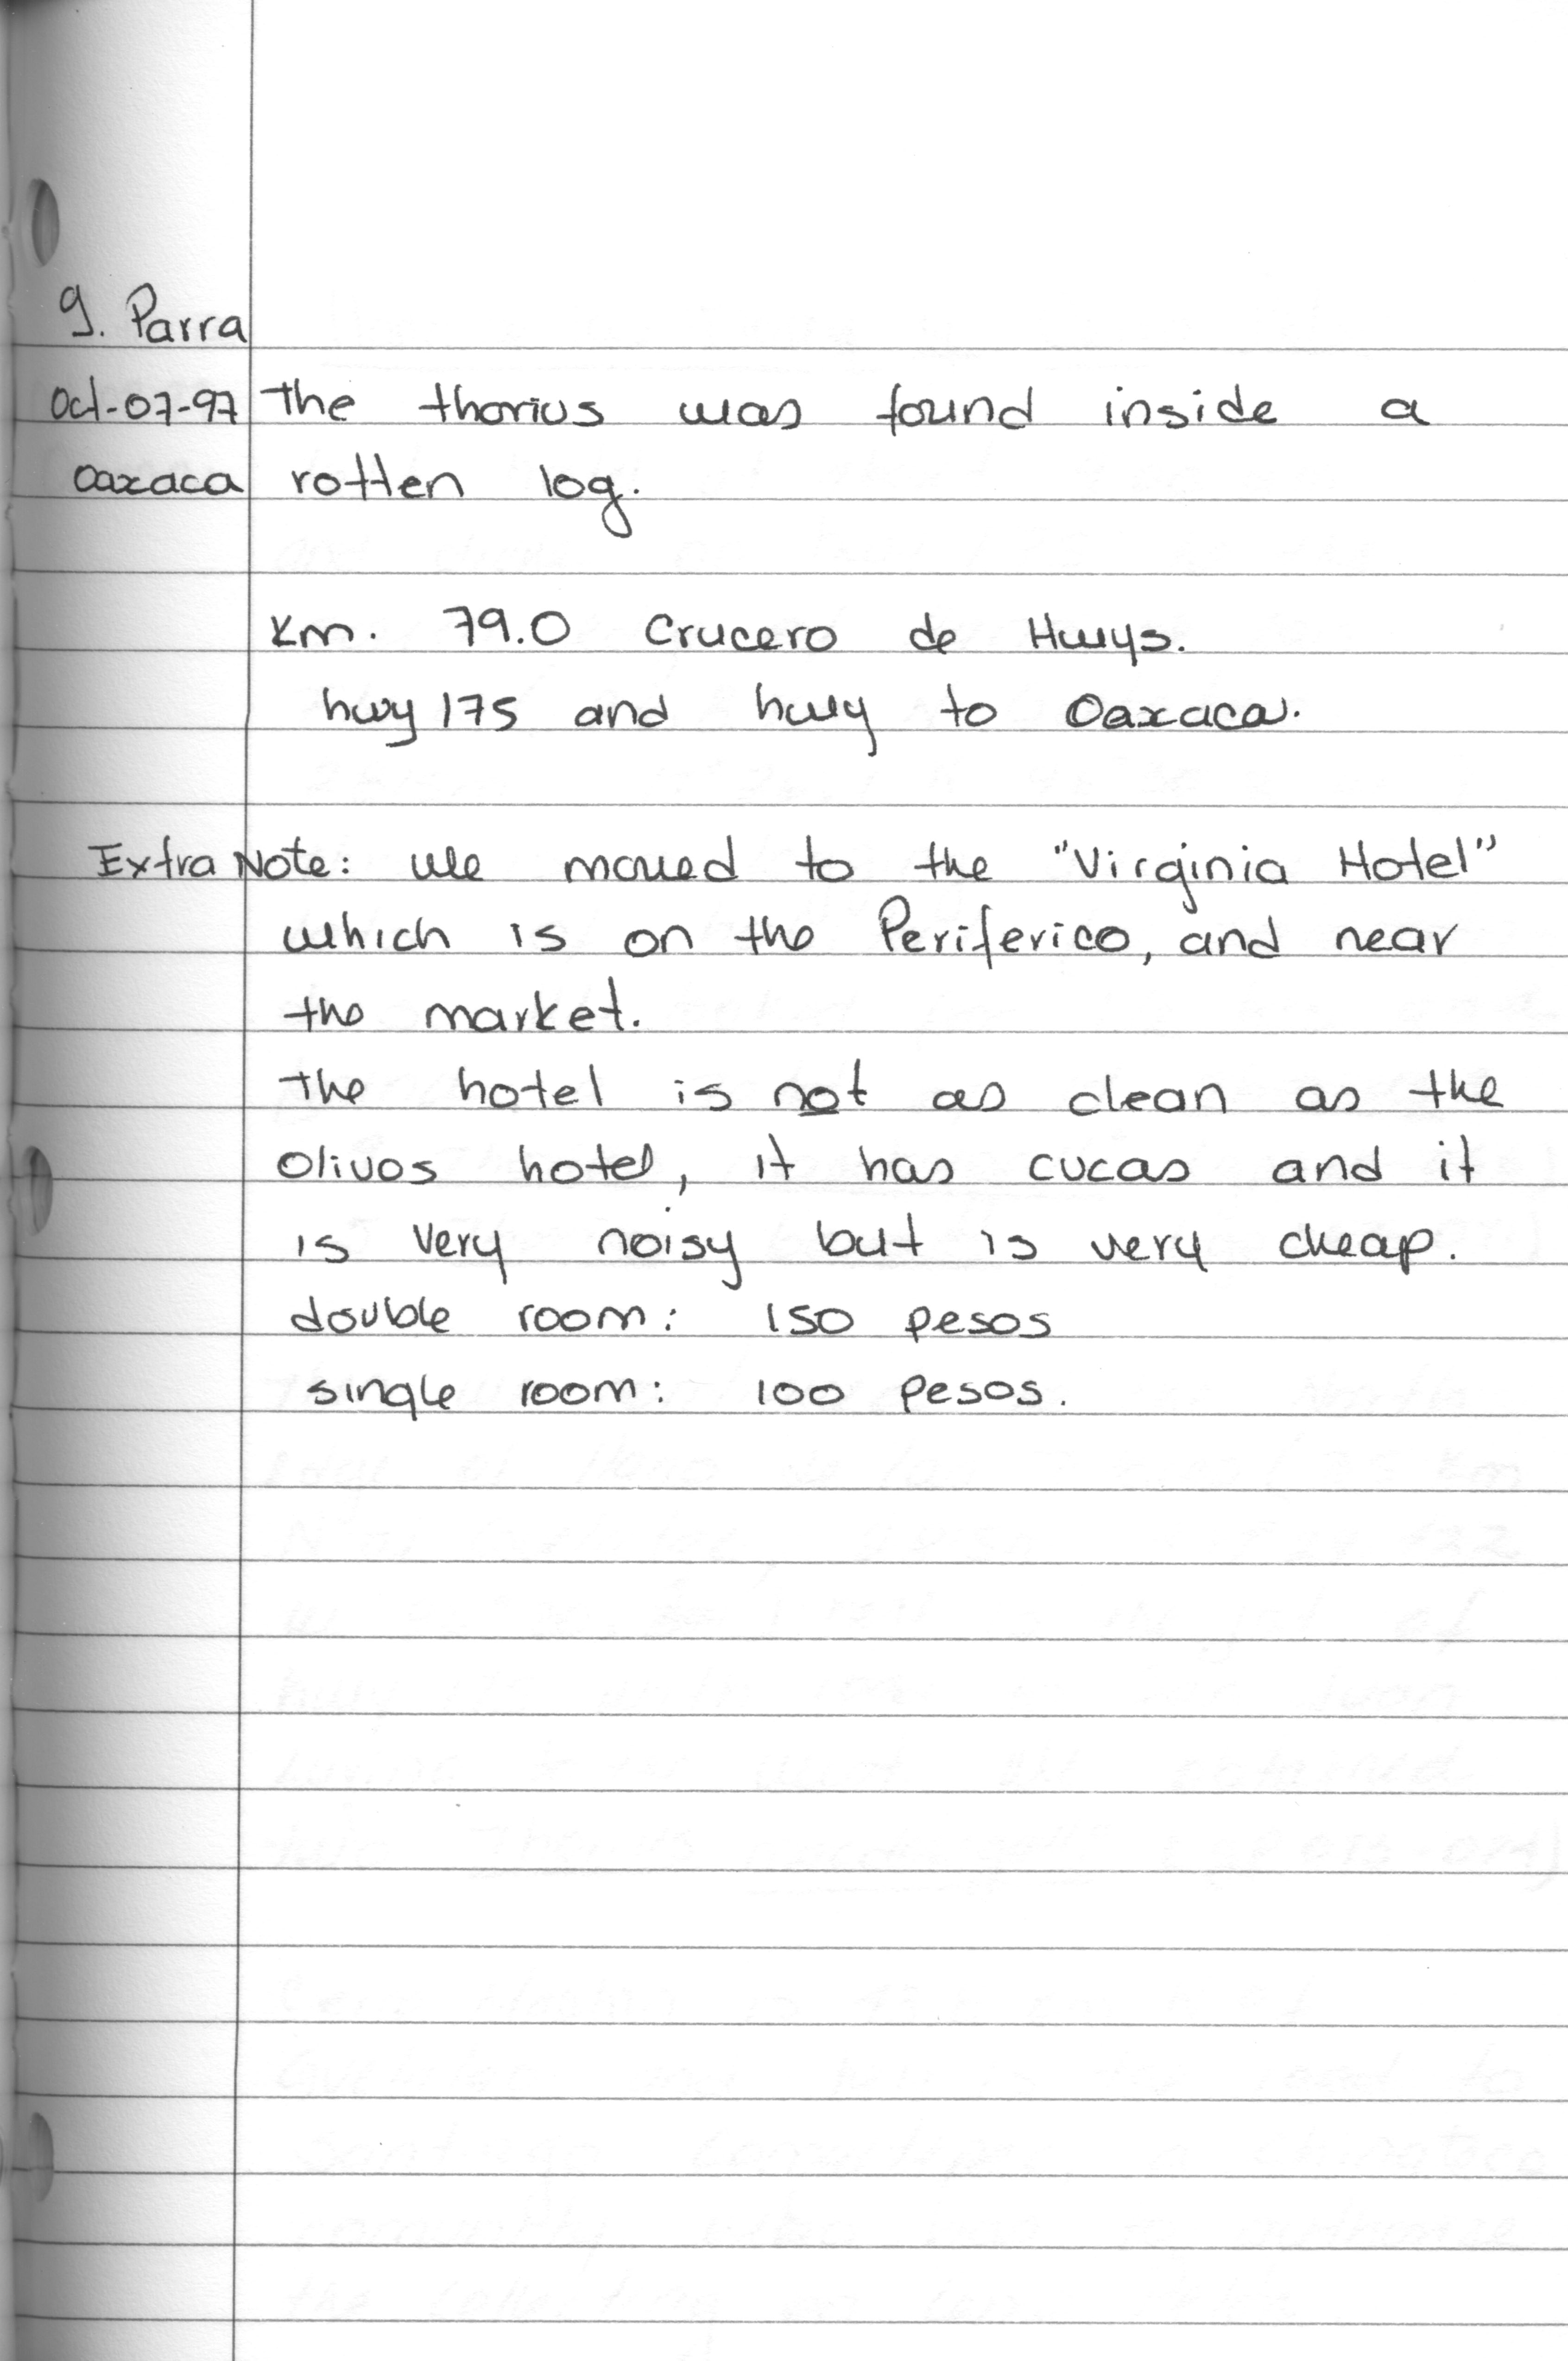 Digitized by Samantha, this page from Gabriela Parra-Olea's 1997 journal describes a hotel stay in Oaxaca, Mexico.